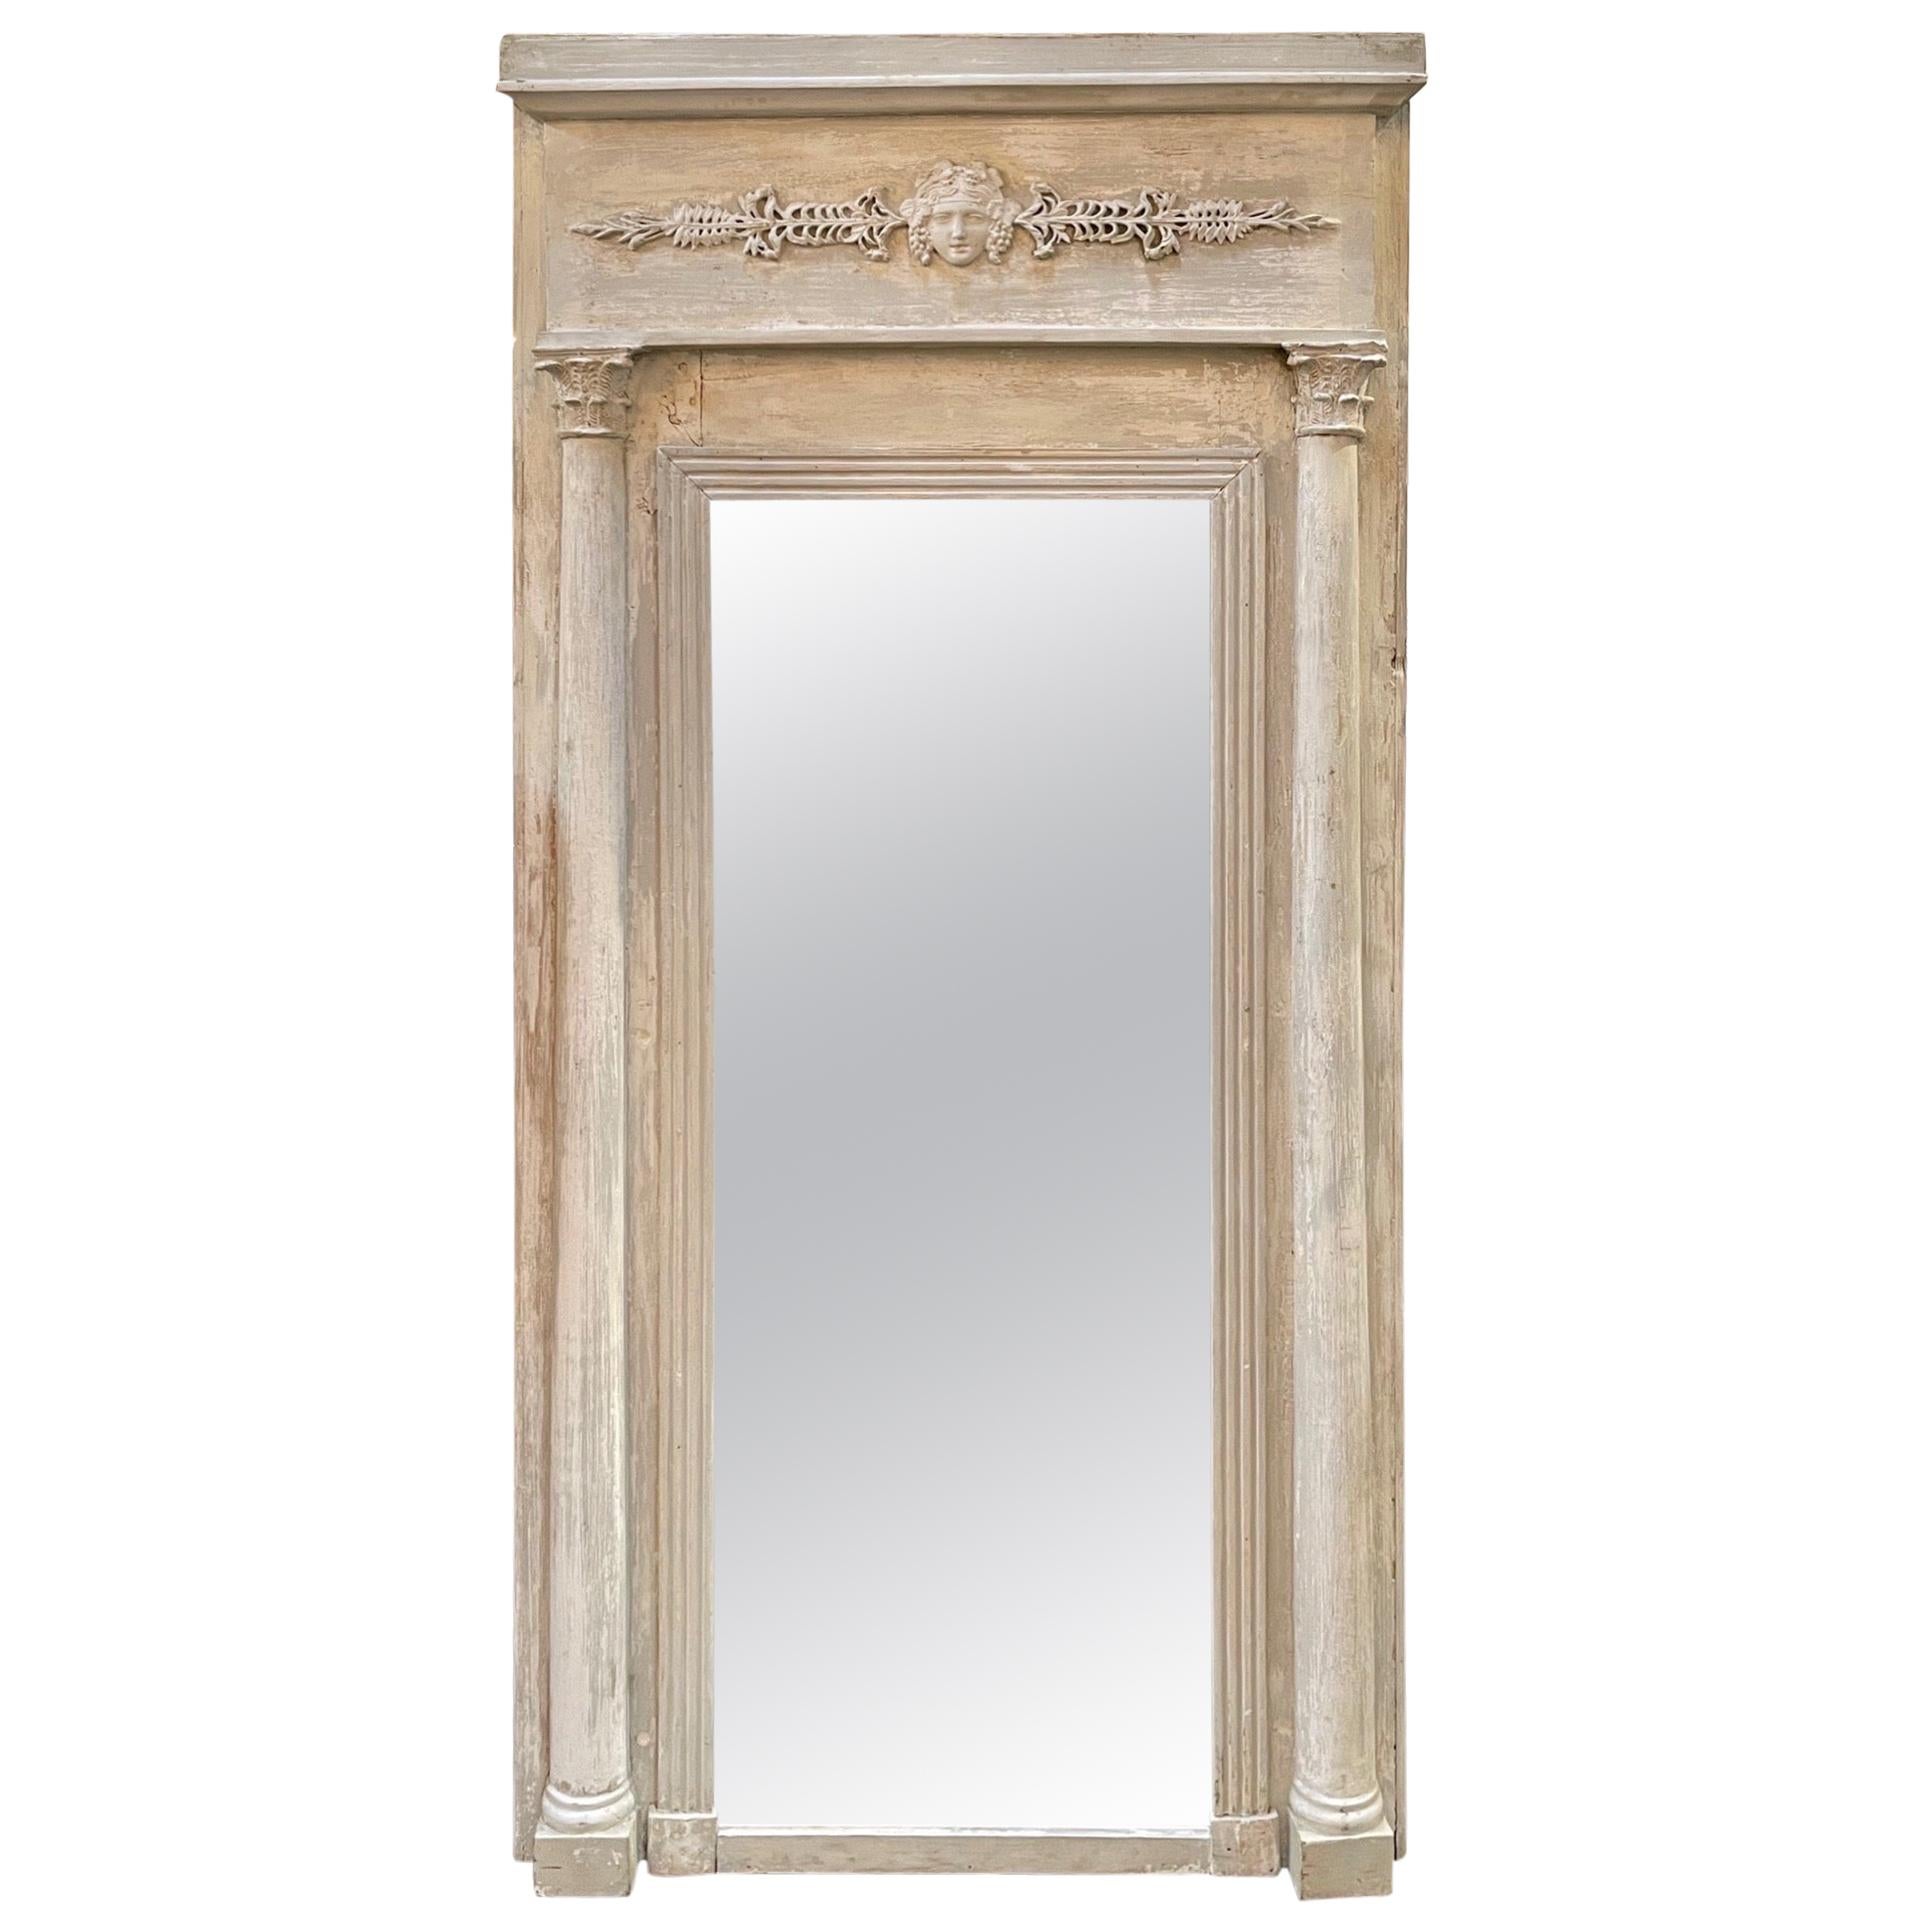 Early 19th Century Swedish Neoclassical Painted Mirror